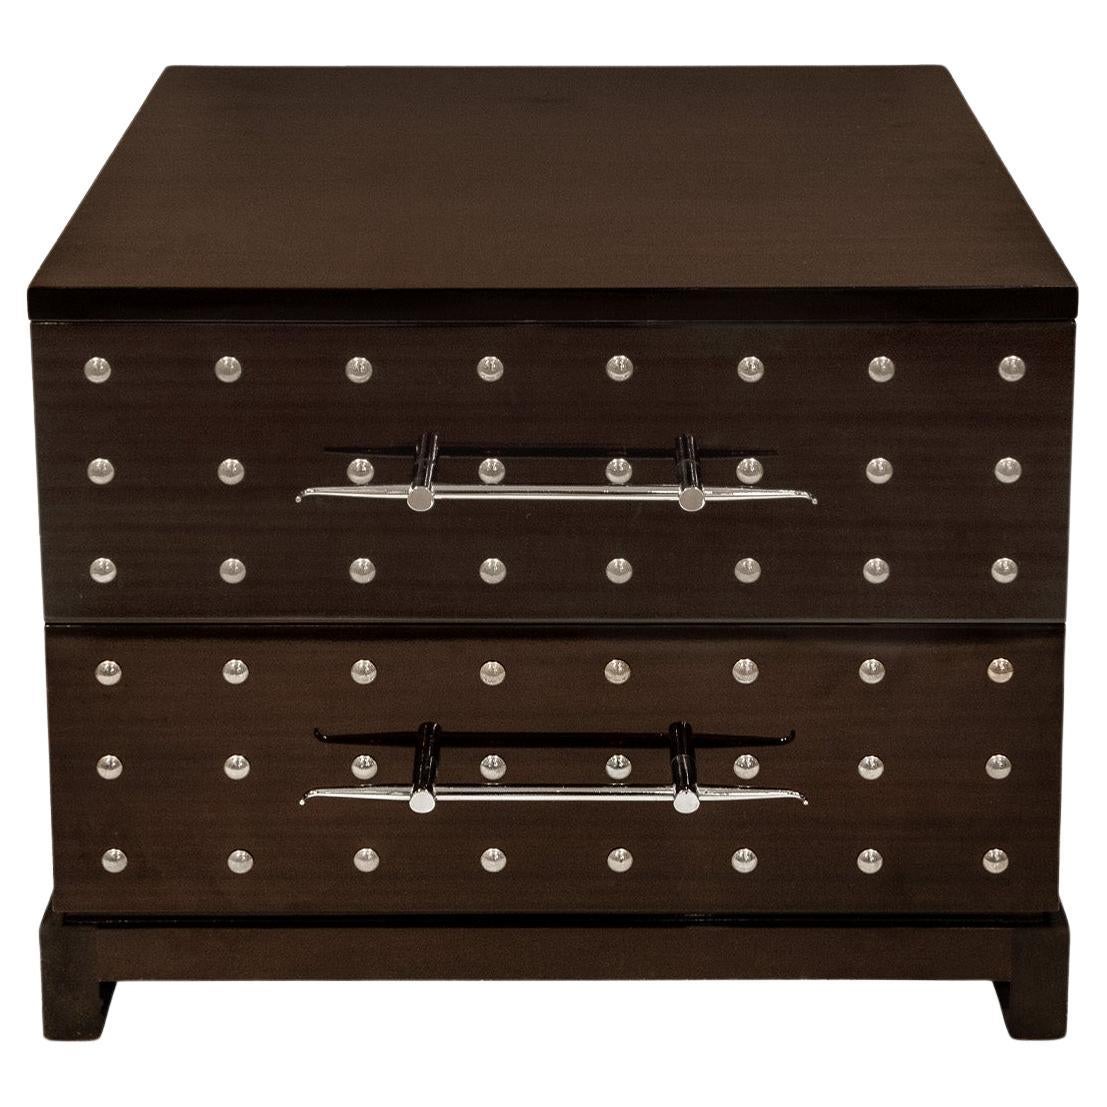 Tommi Parzinger Iconic Studded Small Chest/Bedside Table 1981